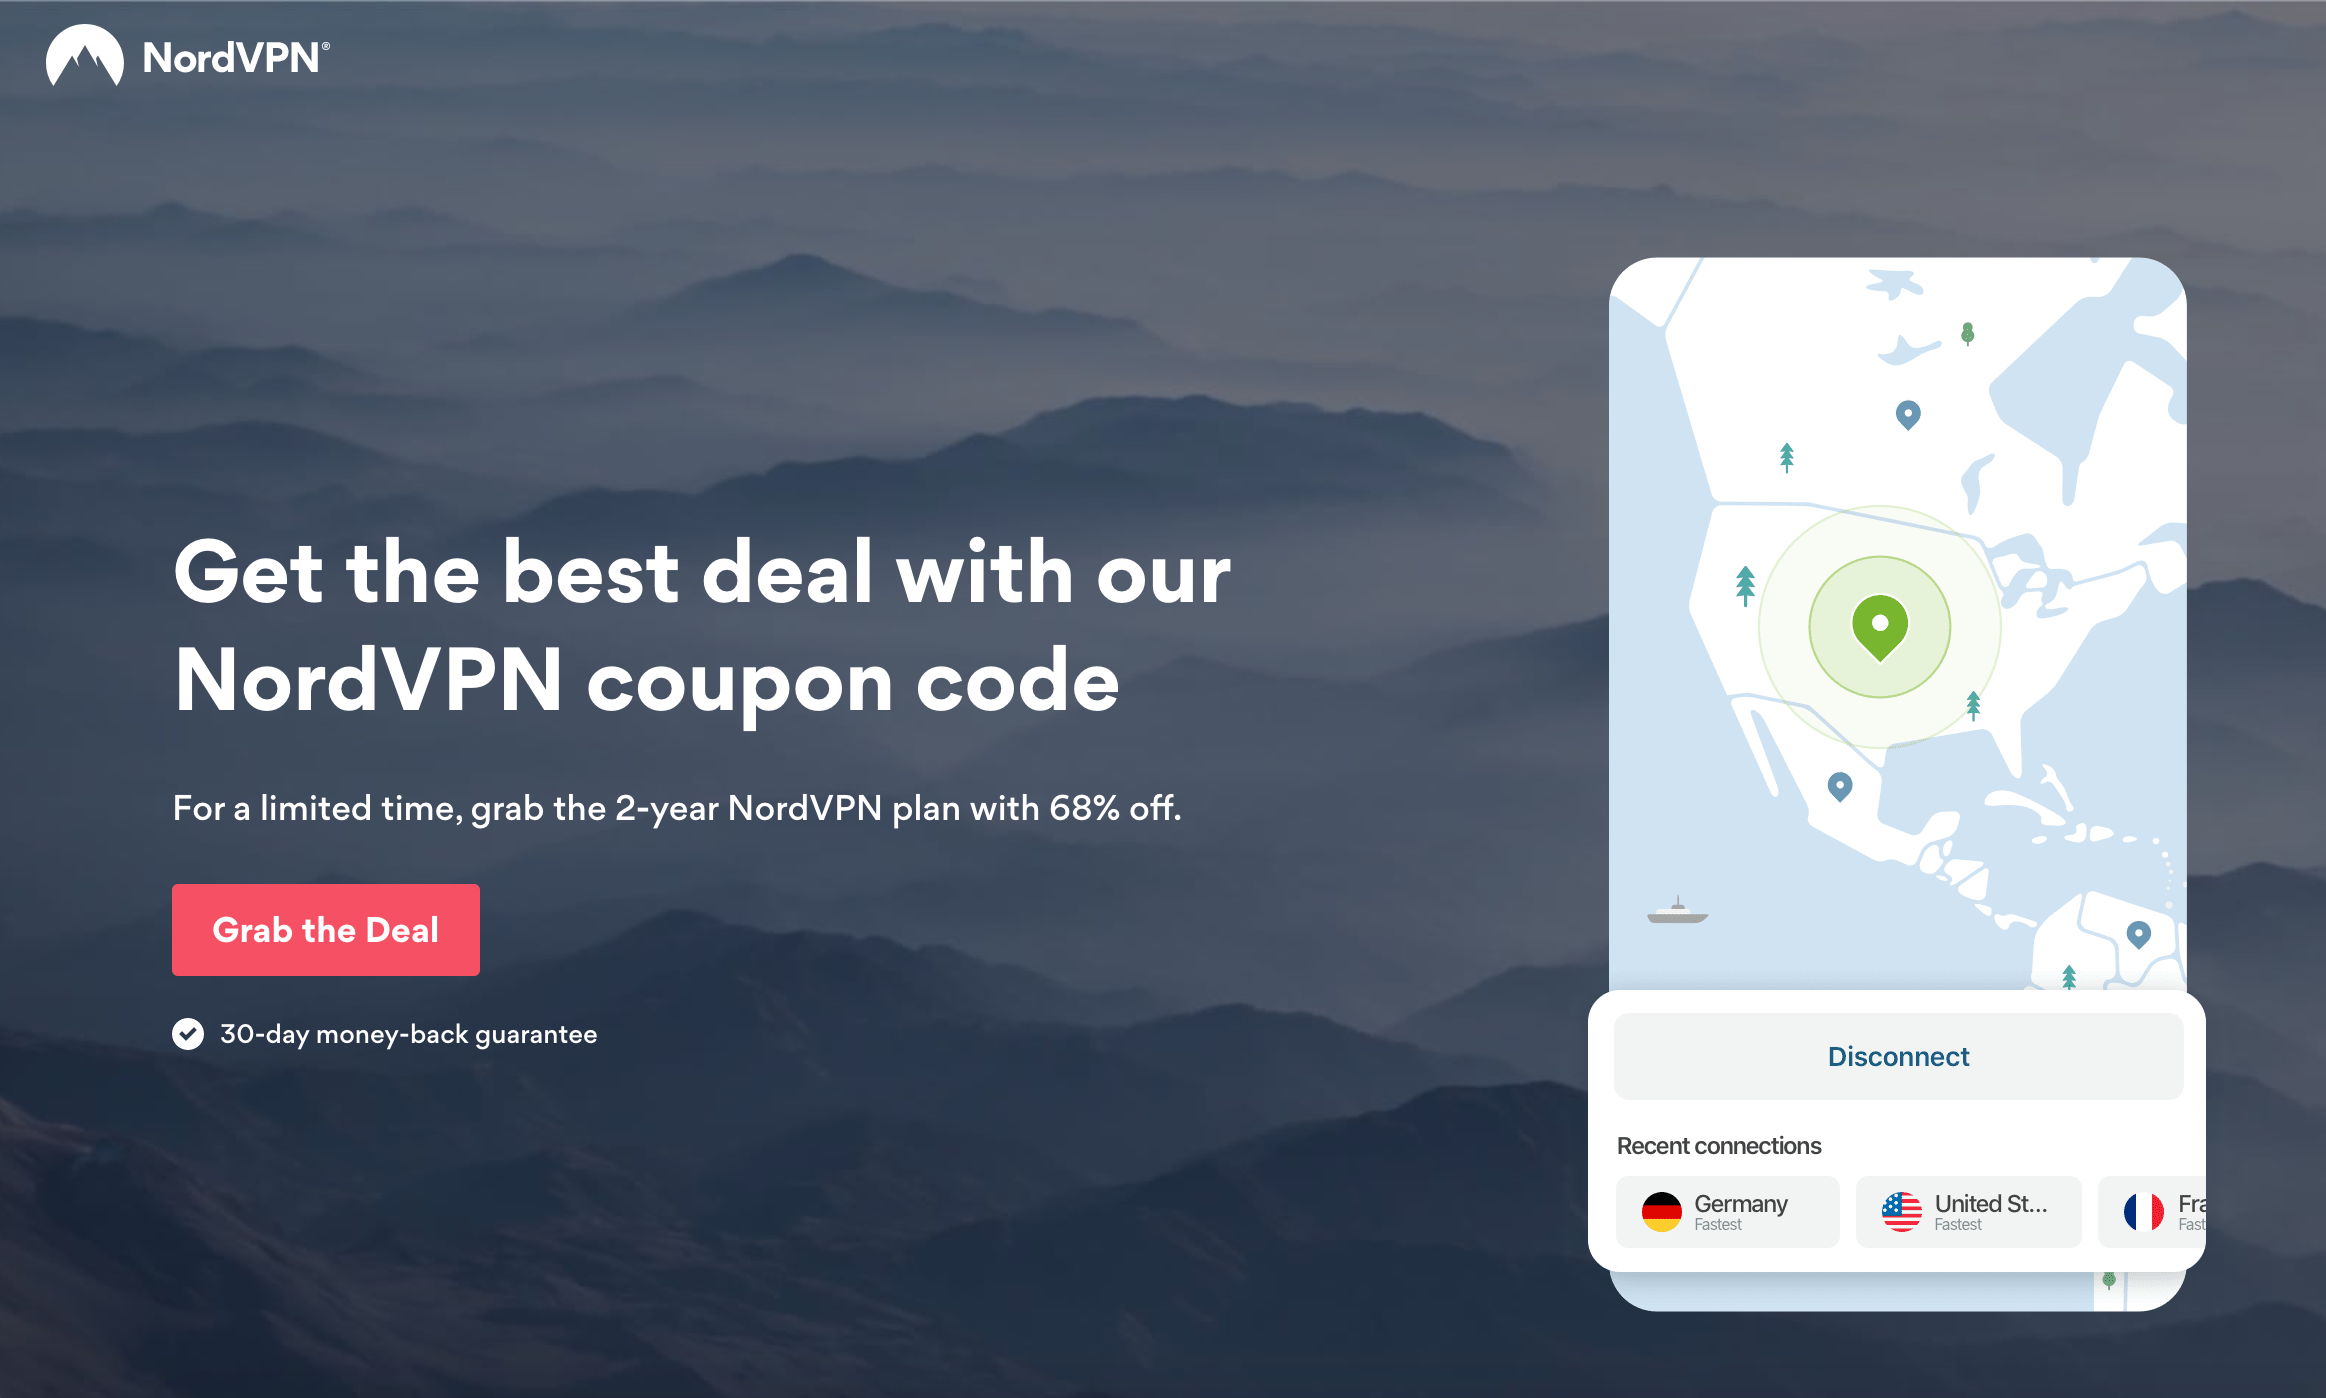 Get NordVPN on discount with an exclusive coupon code